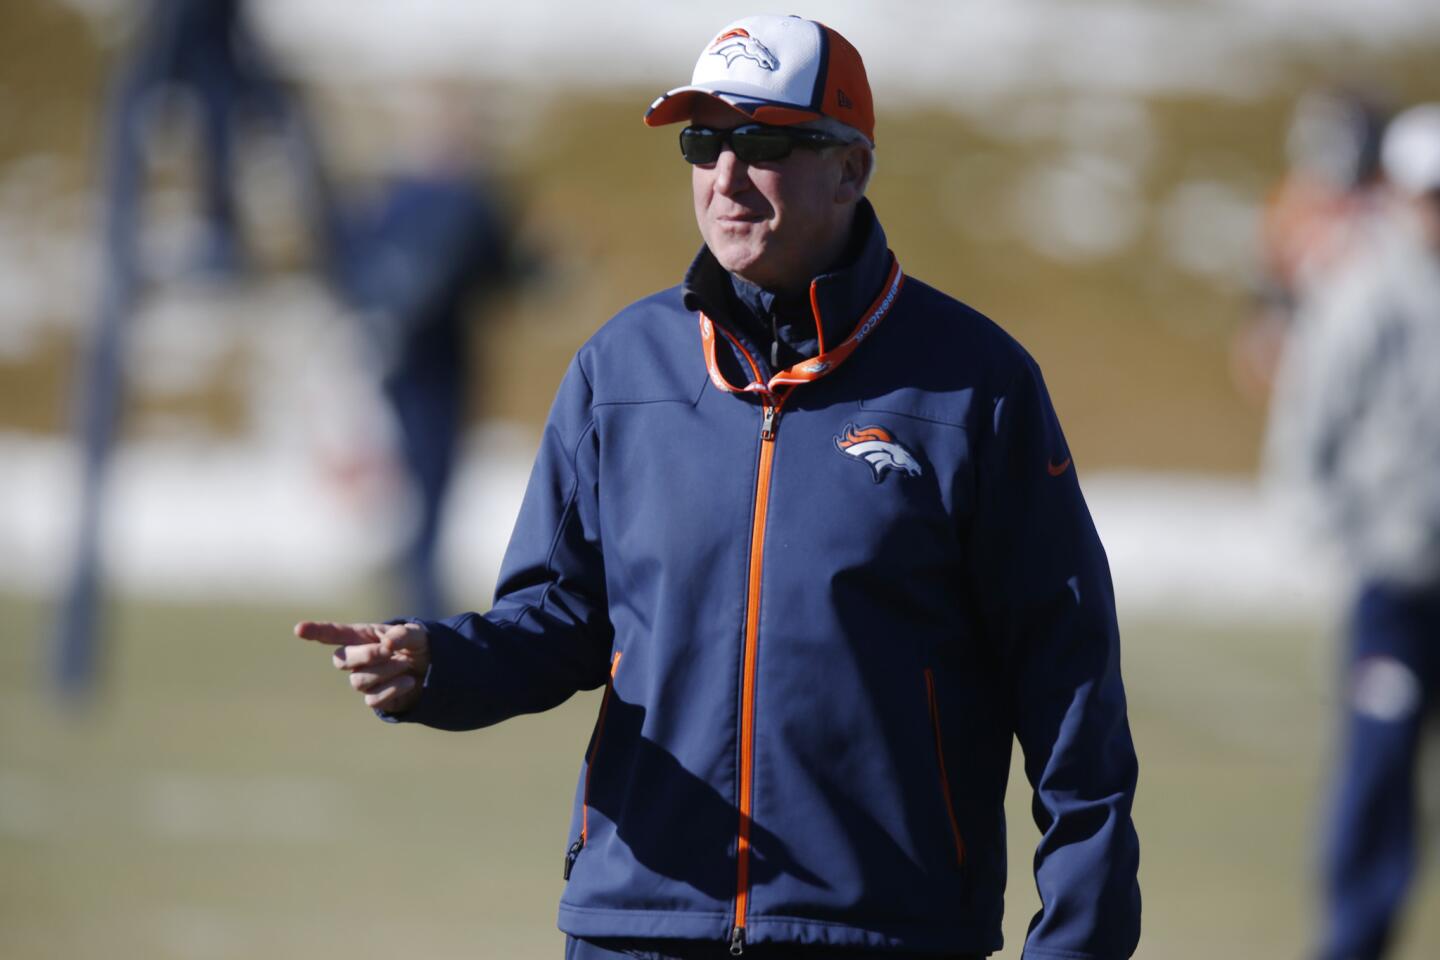 Unafraid to adapt, John Fox shifted the Broncos offensive philosophy to a more balanced run/pass play mix in the final six games of the regular season.